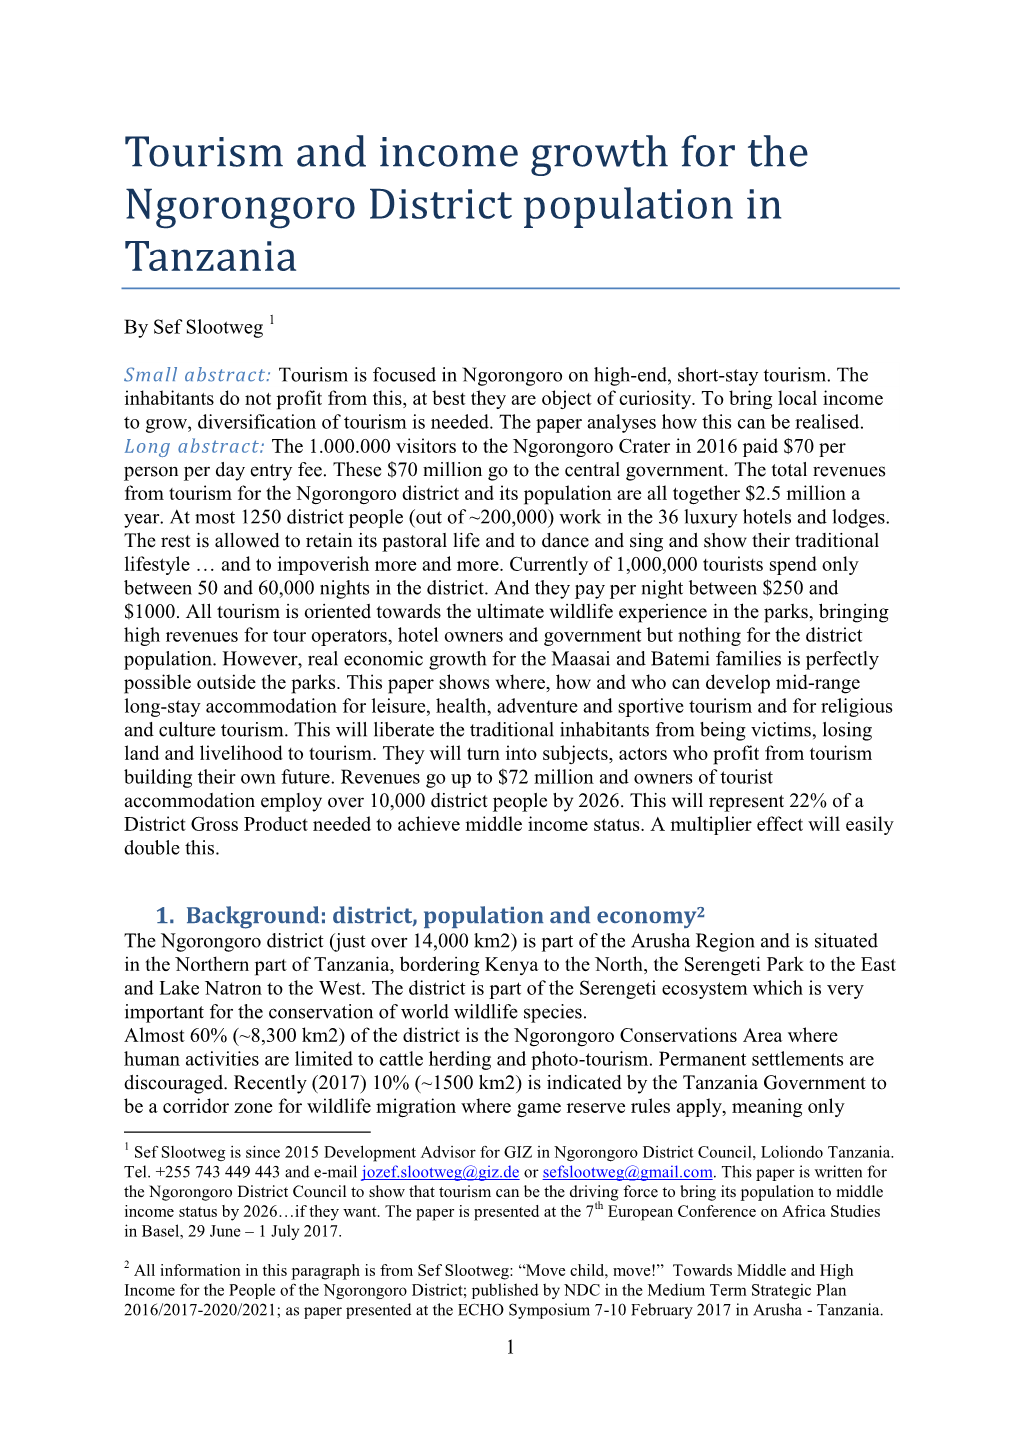 Tourism and Income Growth for the Ngorongoro District Population in Tanzania